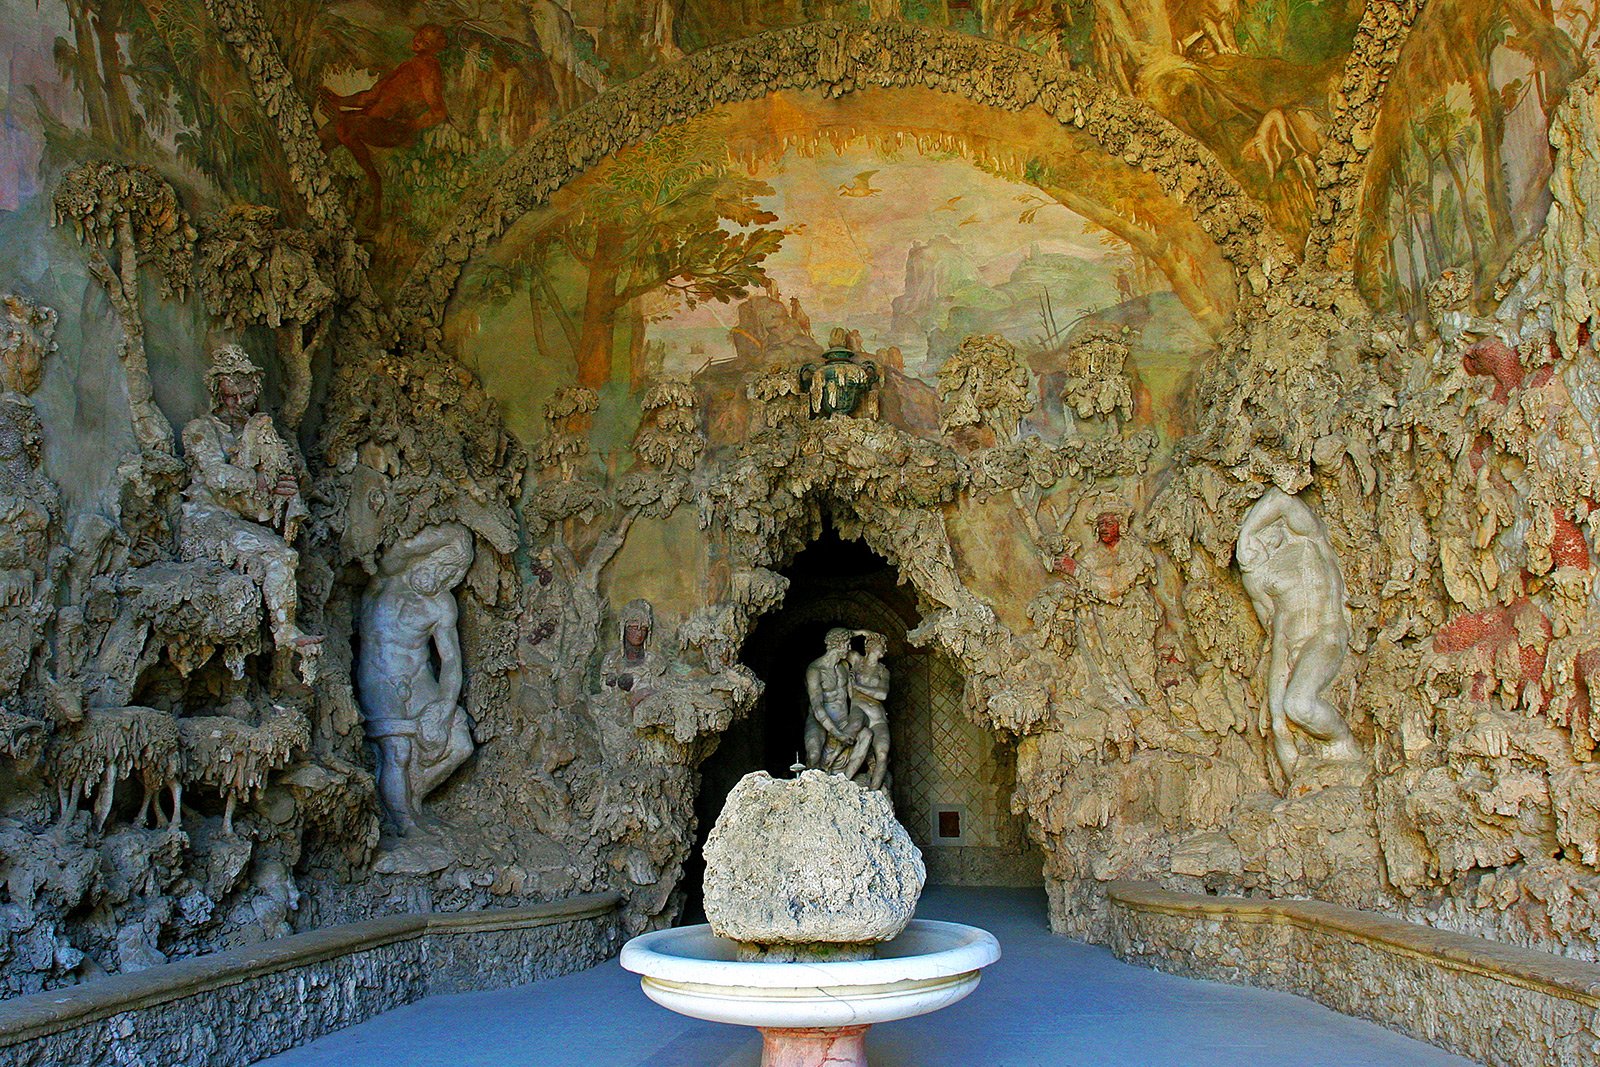 How to find the secret passage in the Buontalenti Grotto in Florence